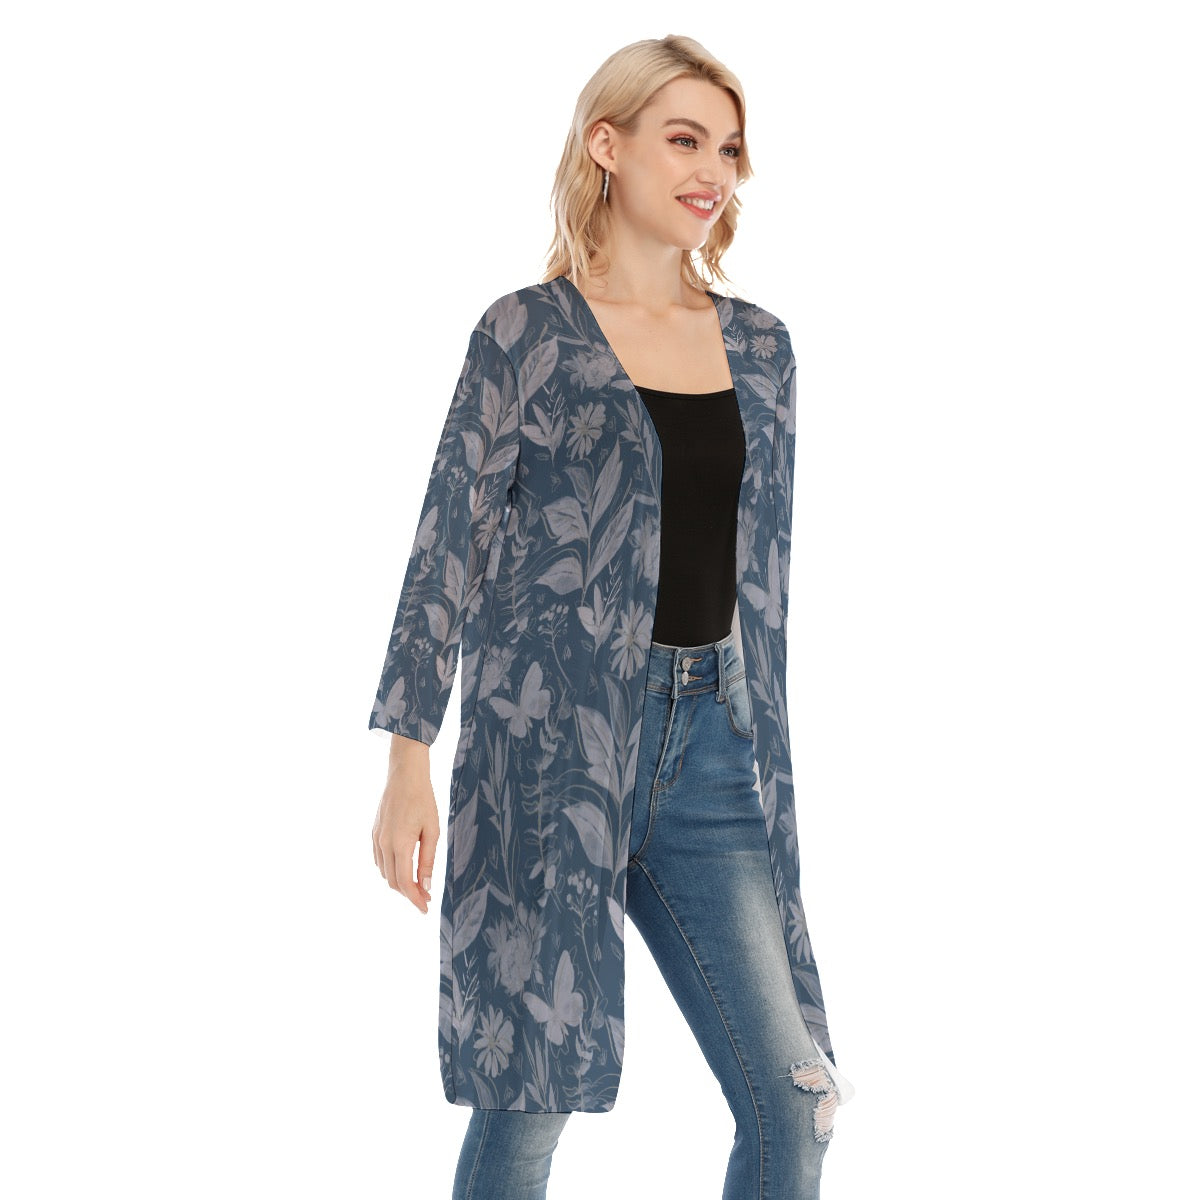 Watercolor Blue V-neck Mesh Cardigan. Mesh Kimono. Houston Collection. Design hand-painted by the Designer Maria Alejand